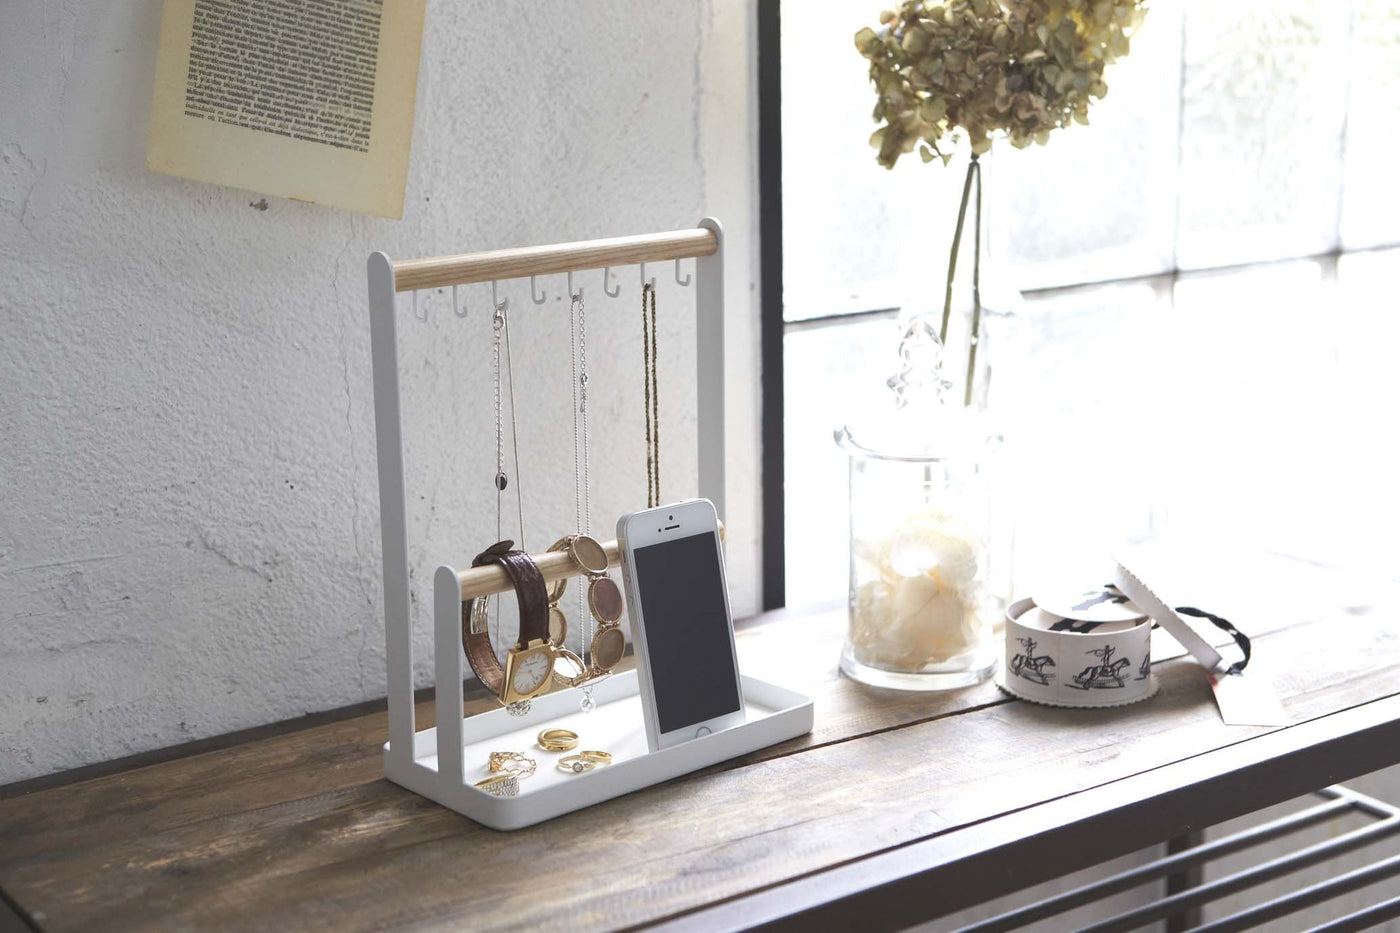 Wood and steel accessories tray filled with necklaces, watches, and mobile phone; sitting on a desk in a sunny room.